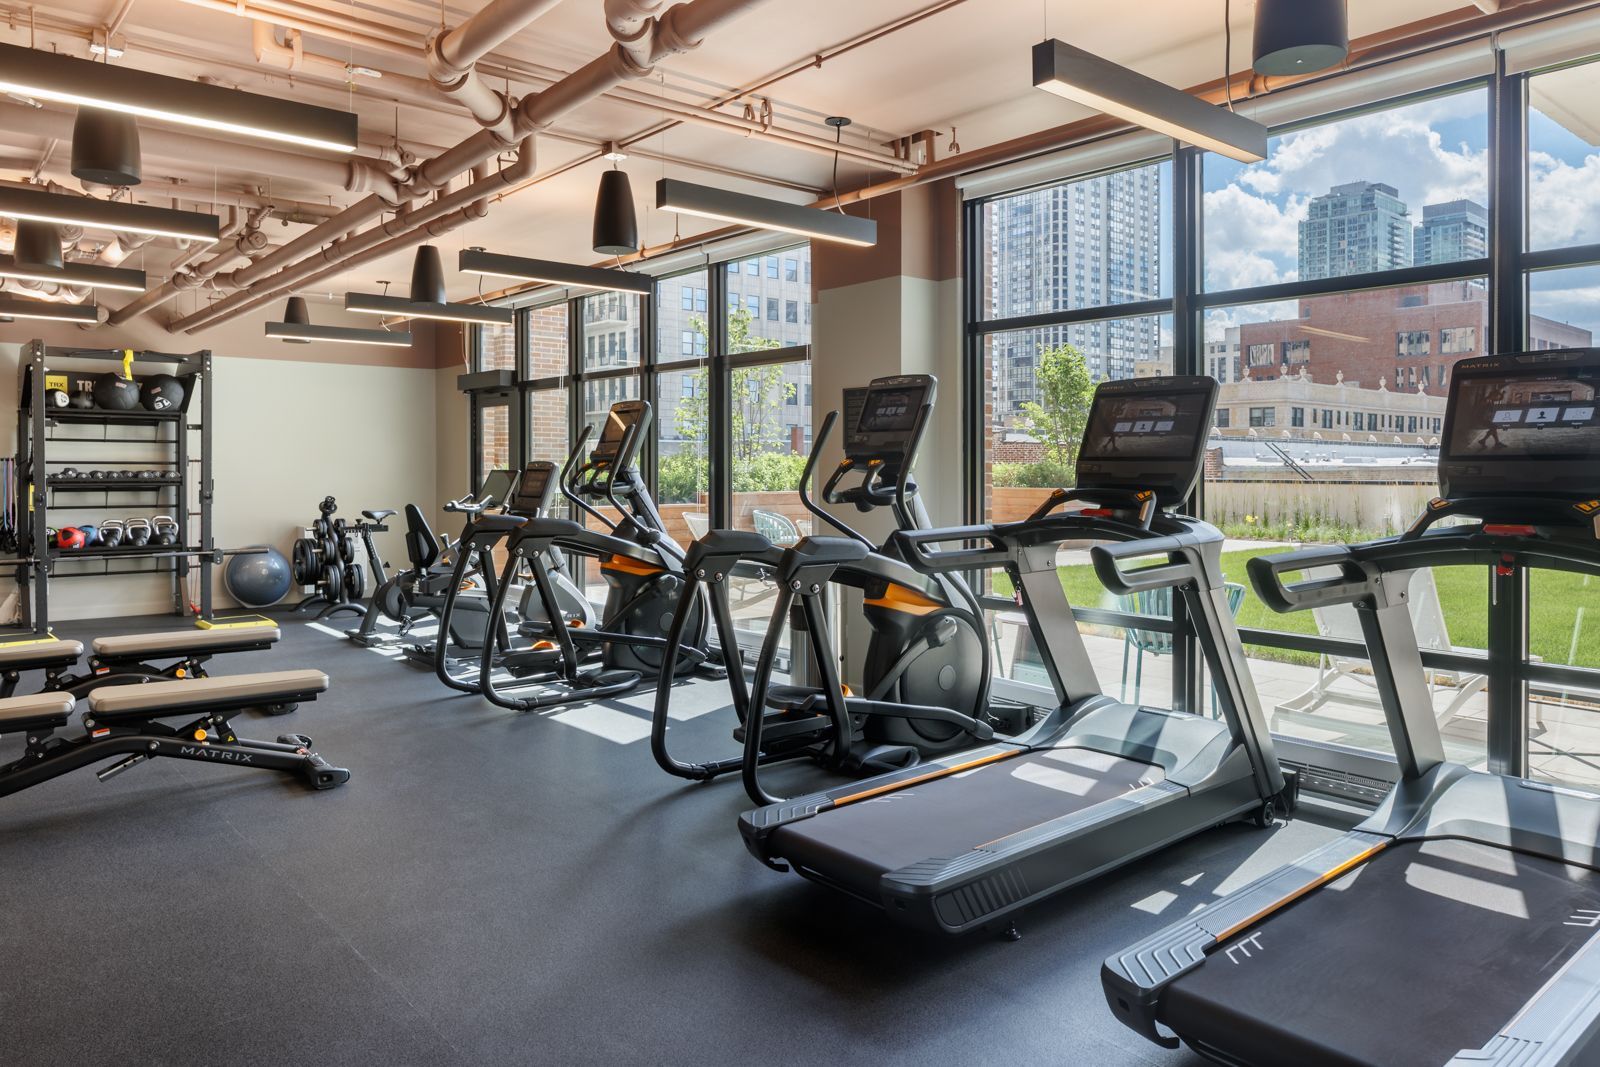 Apartment community fitness center with machines at Gild Apartment.